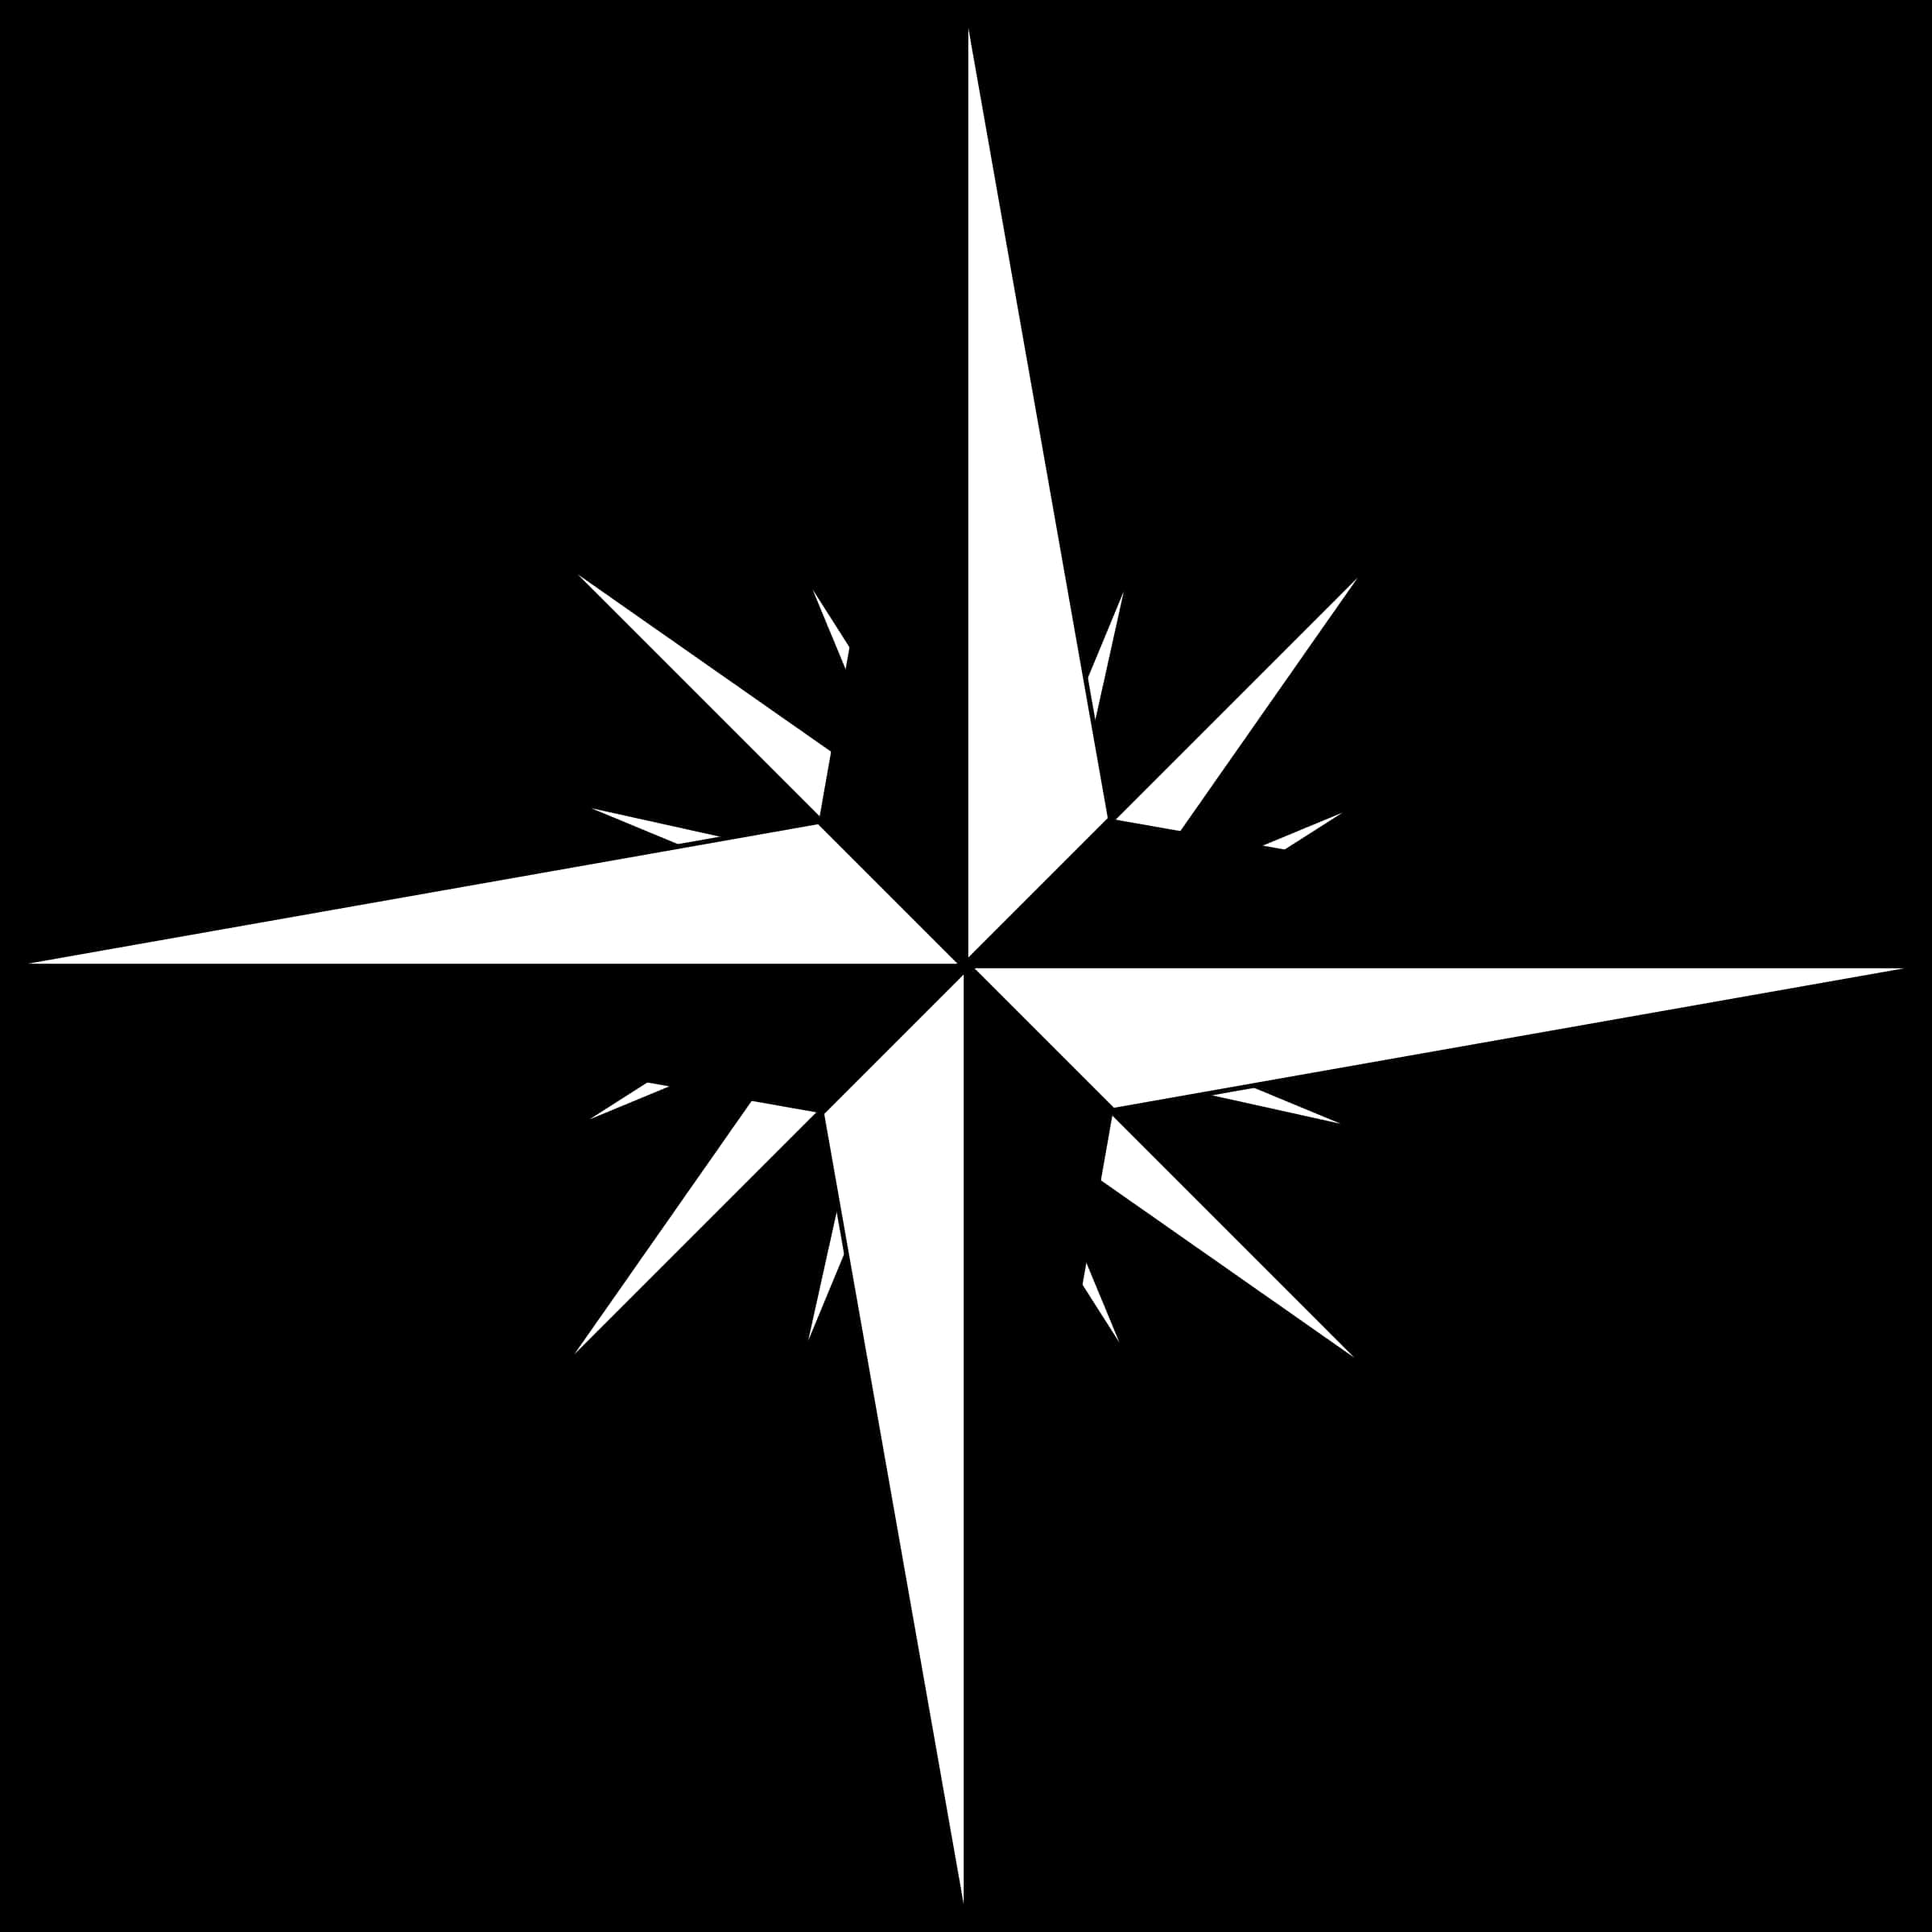 A White Star On A Black Background